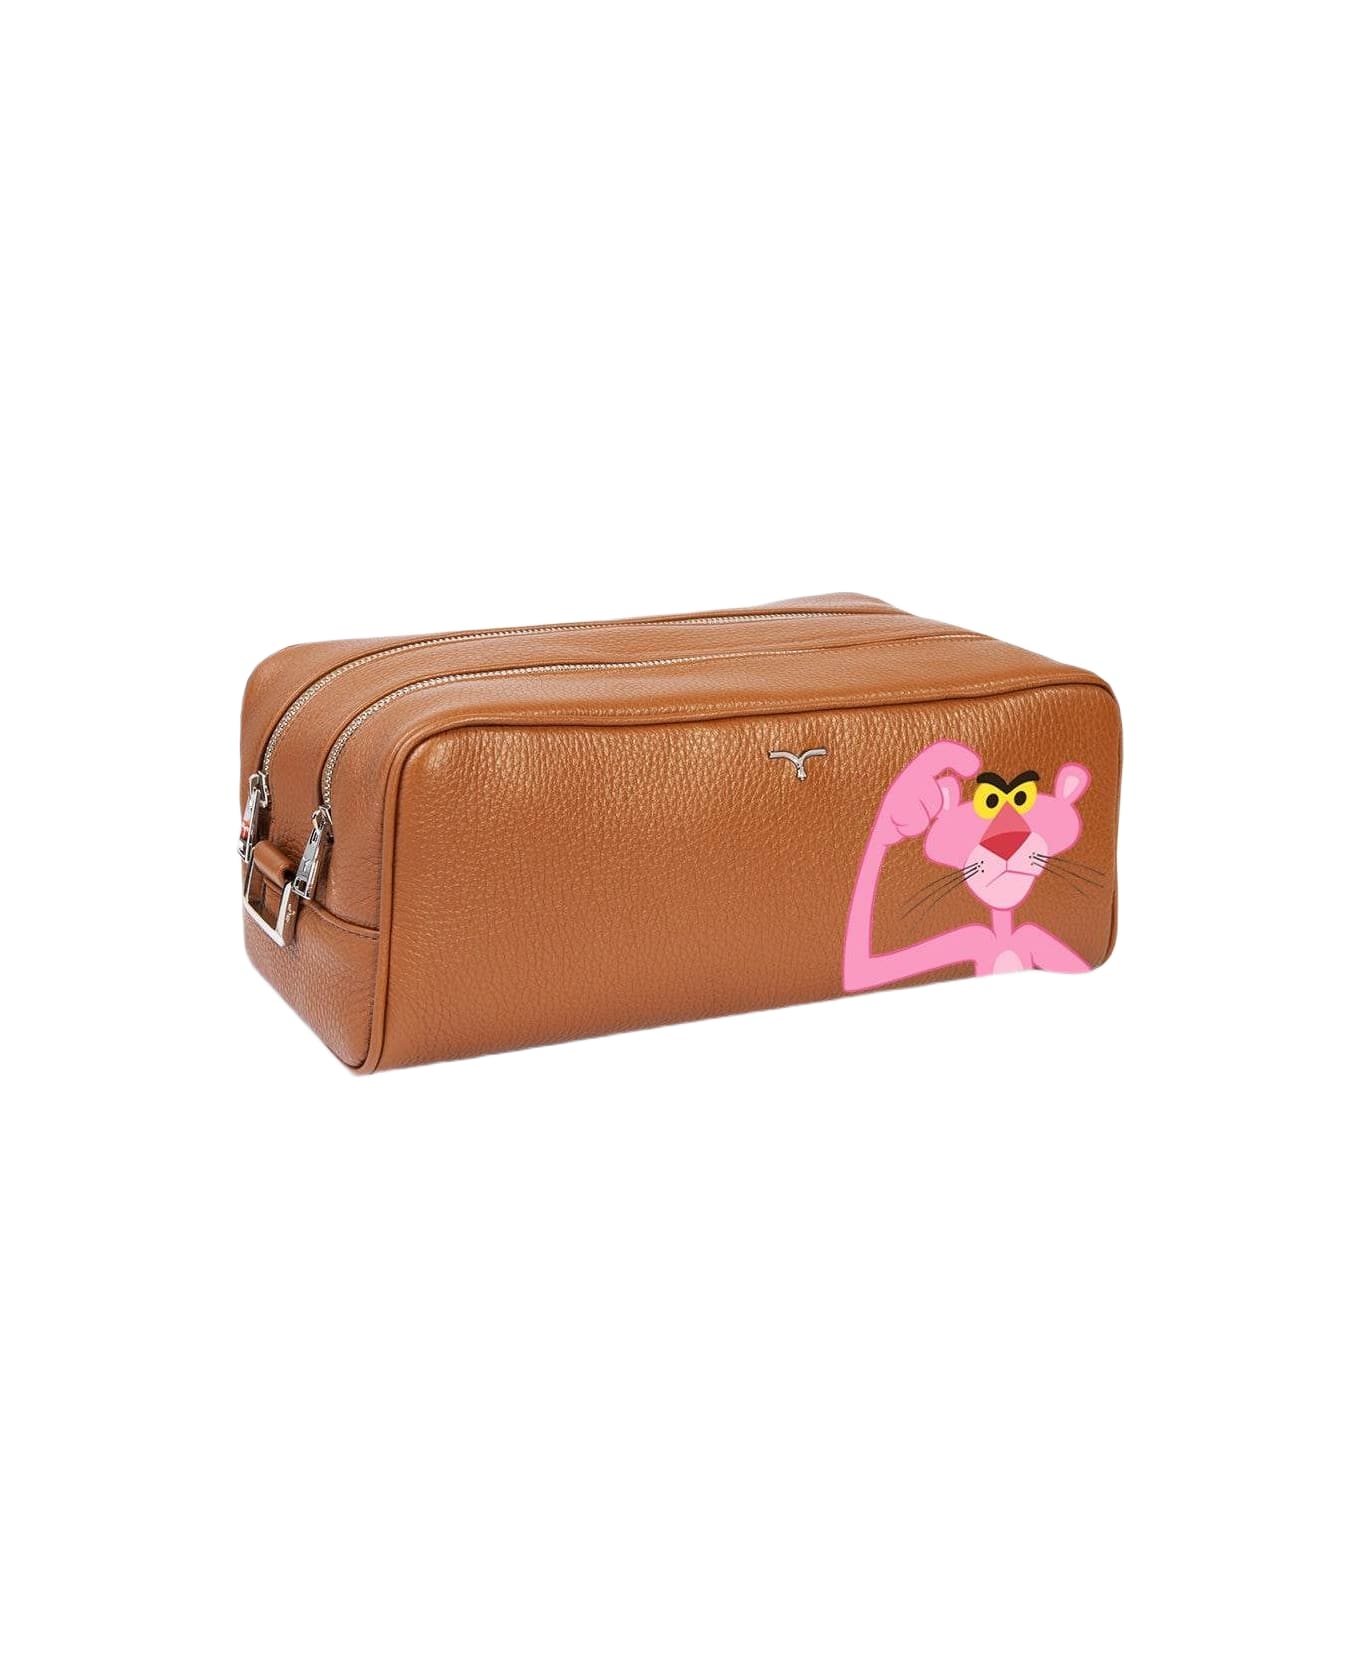 Larusmiani Nécessaire 'pink Panther' Luggage - Sienna トラベルバッグ